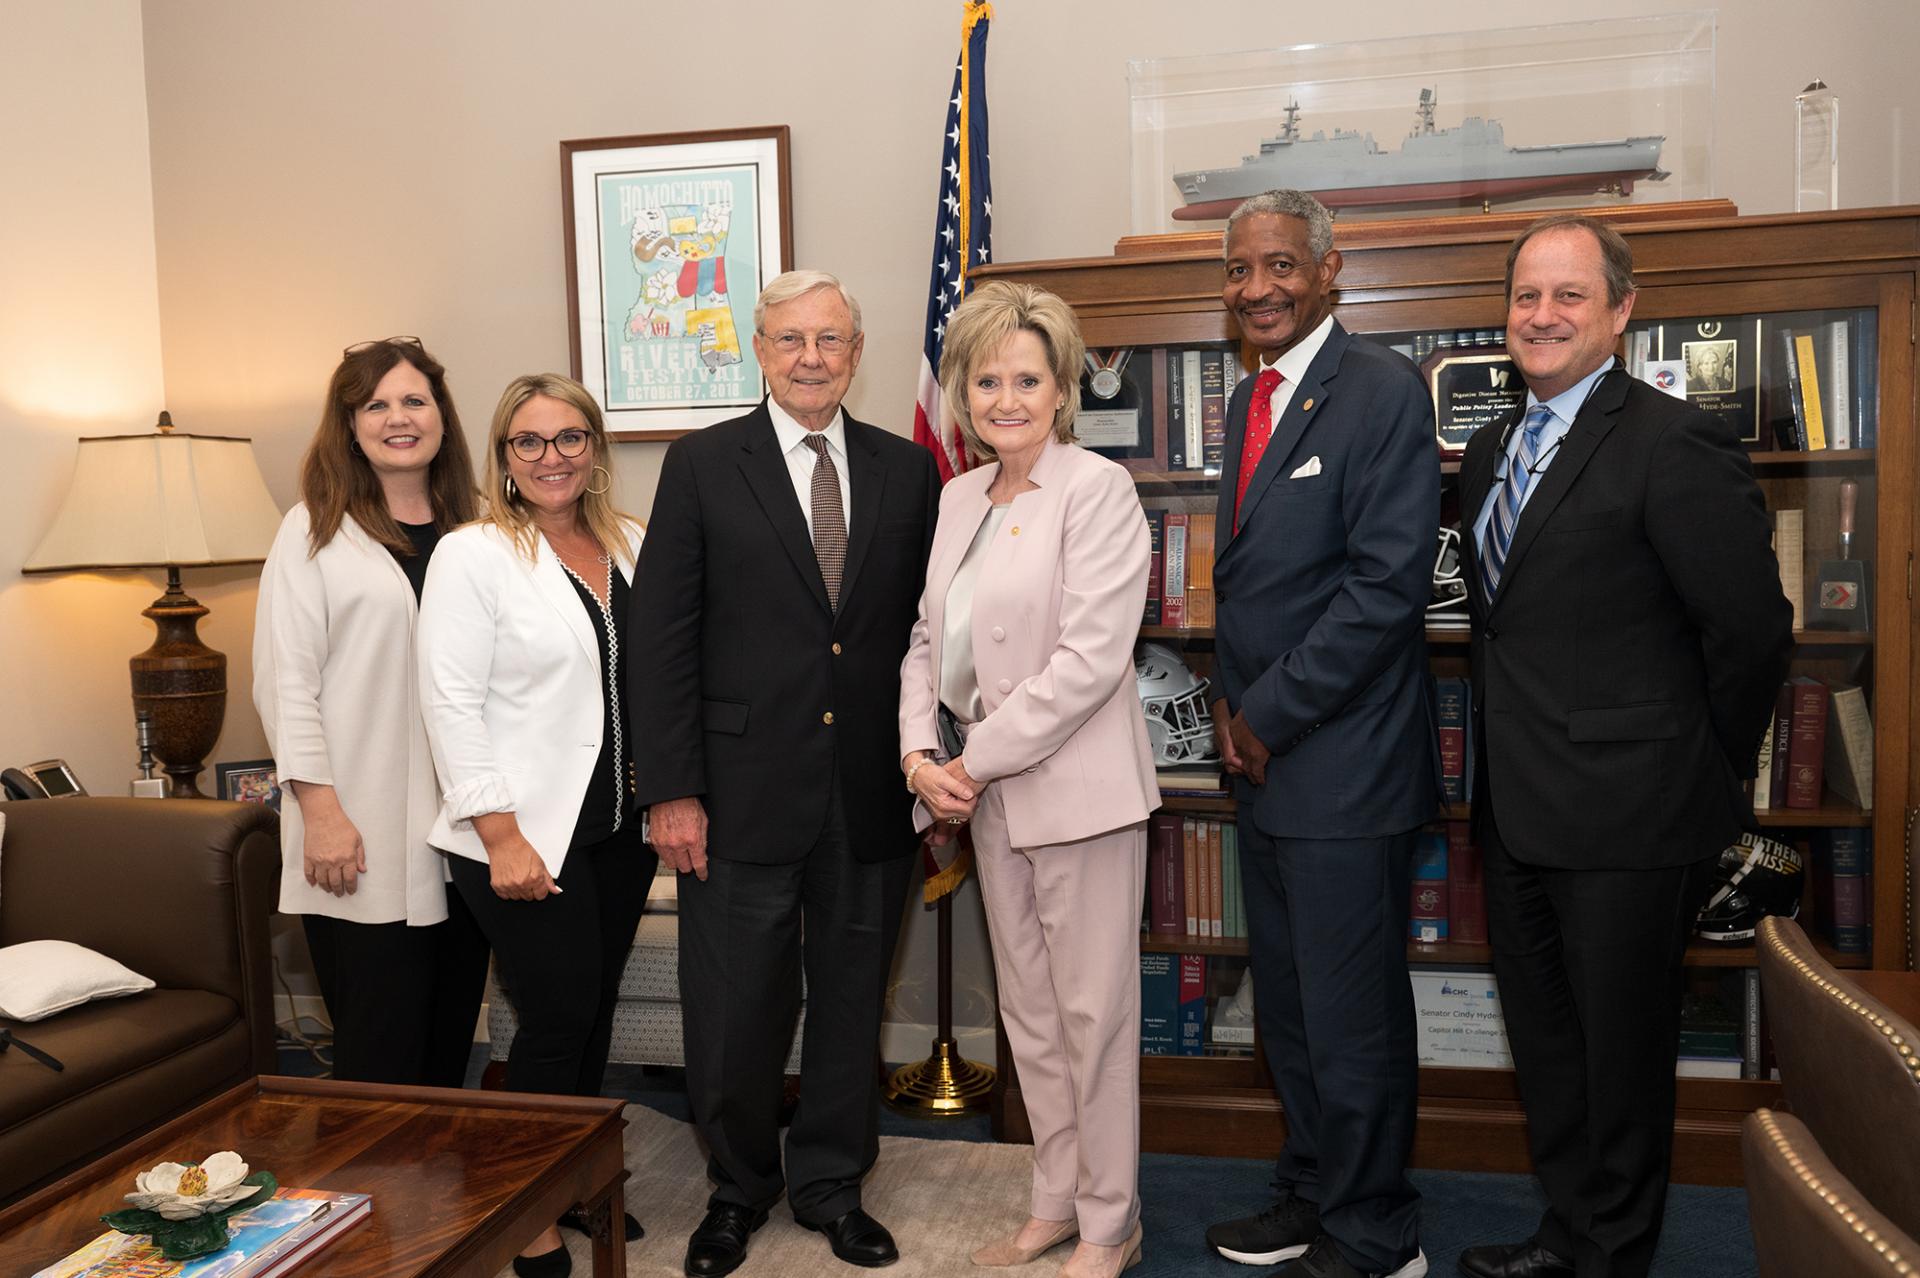 Senator Hyde-Smith meets with the City of Laurel delegation led by Mayor Johnny Magee. (May 24, 2022)